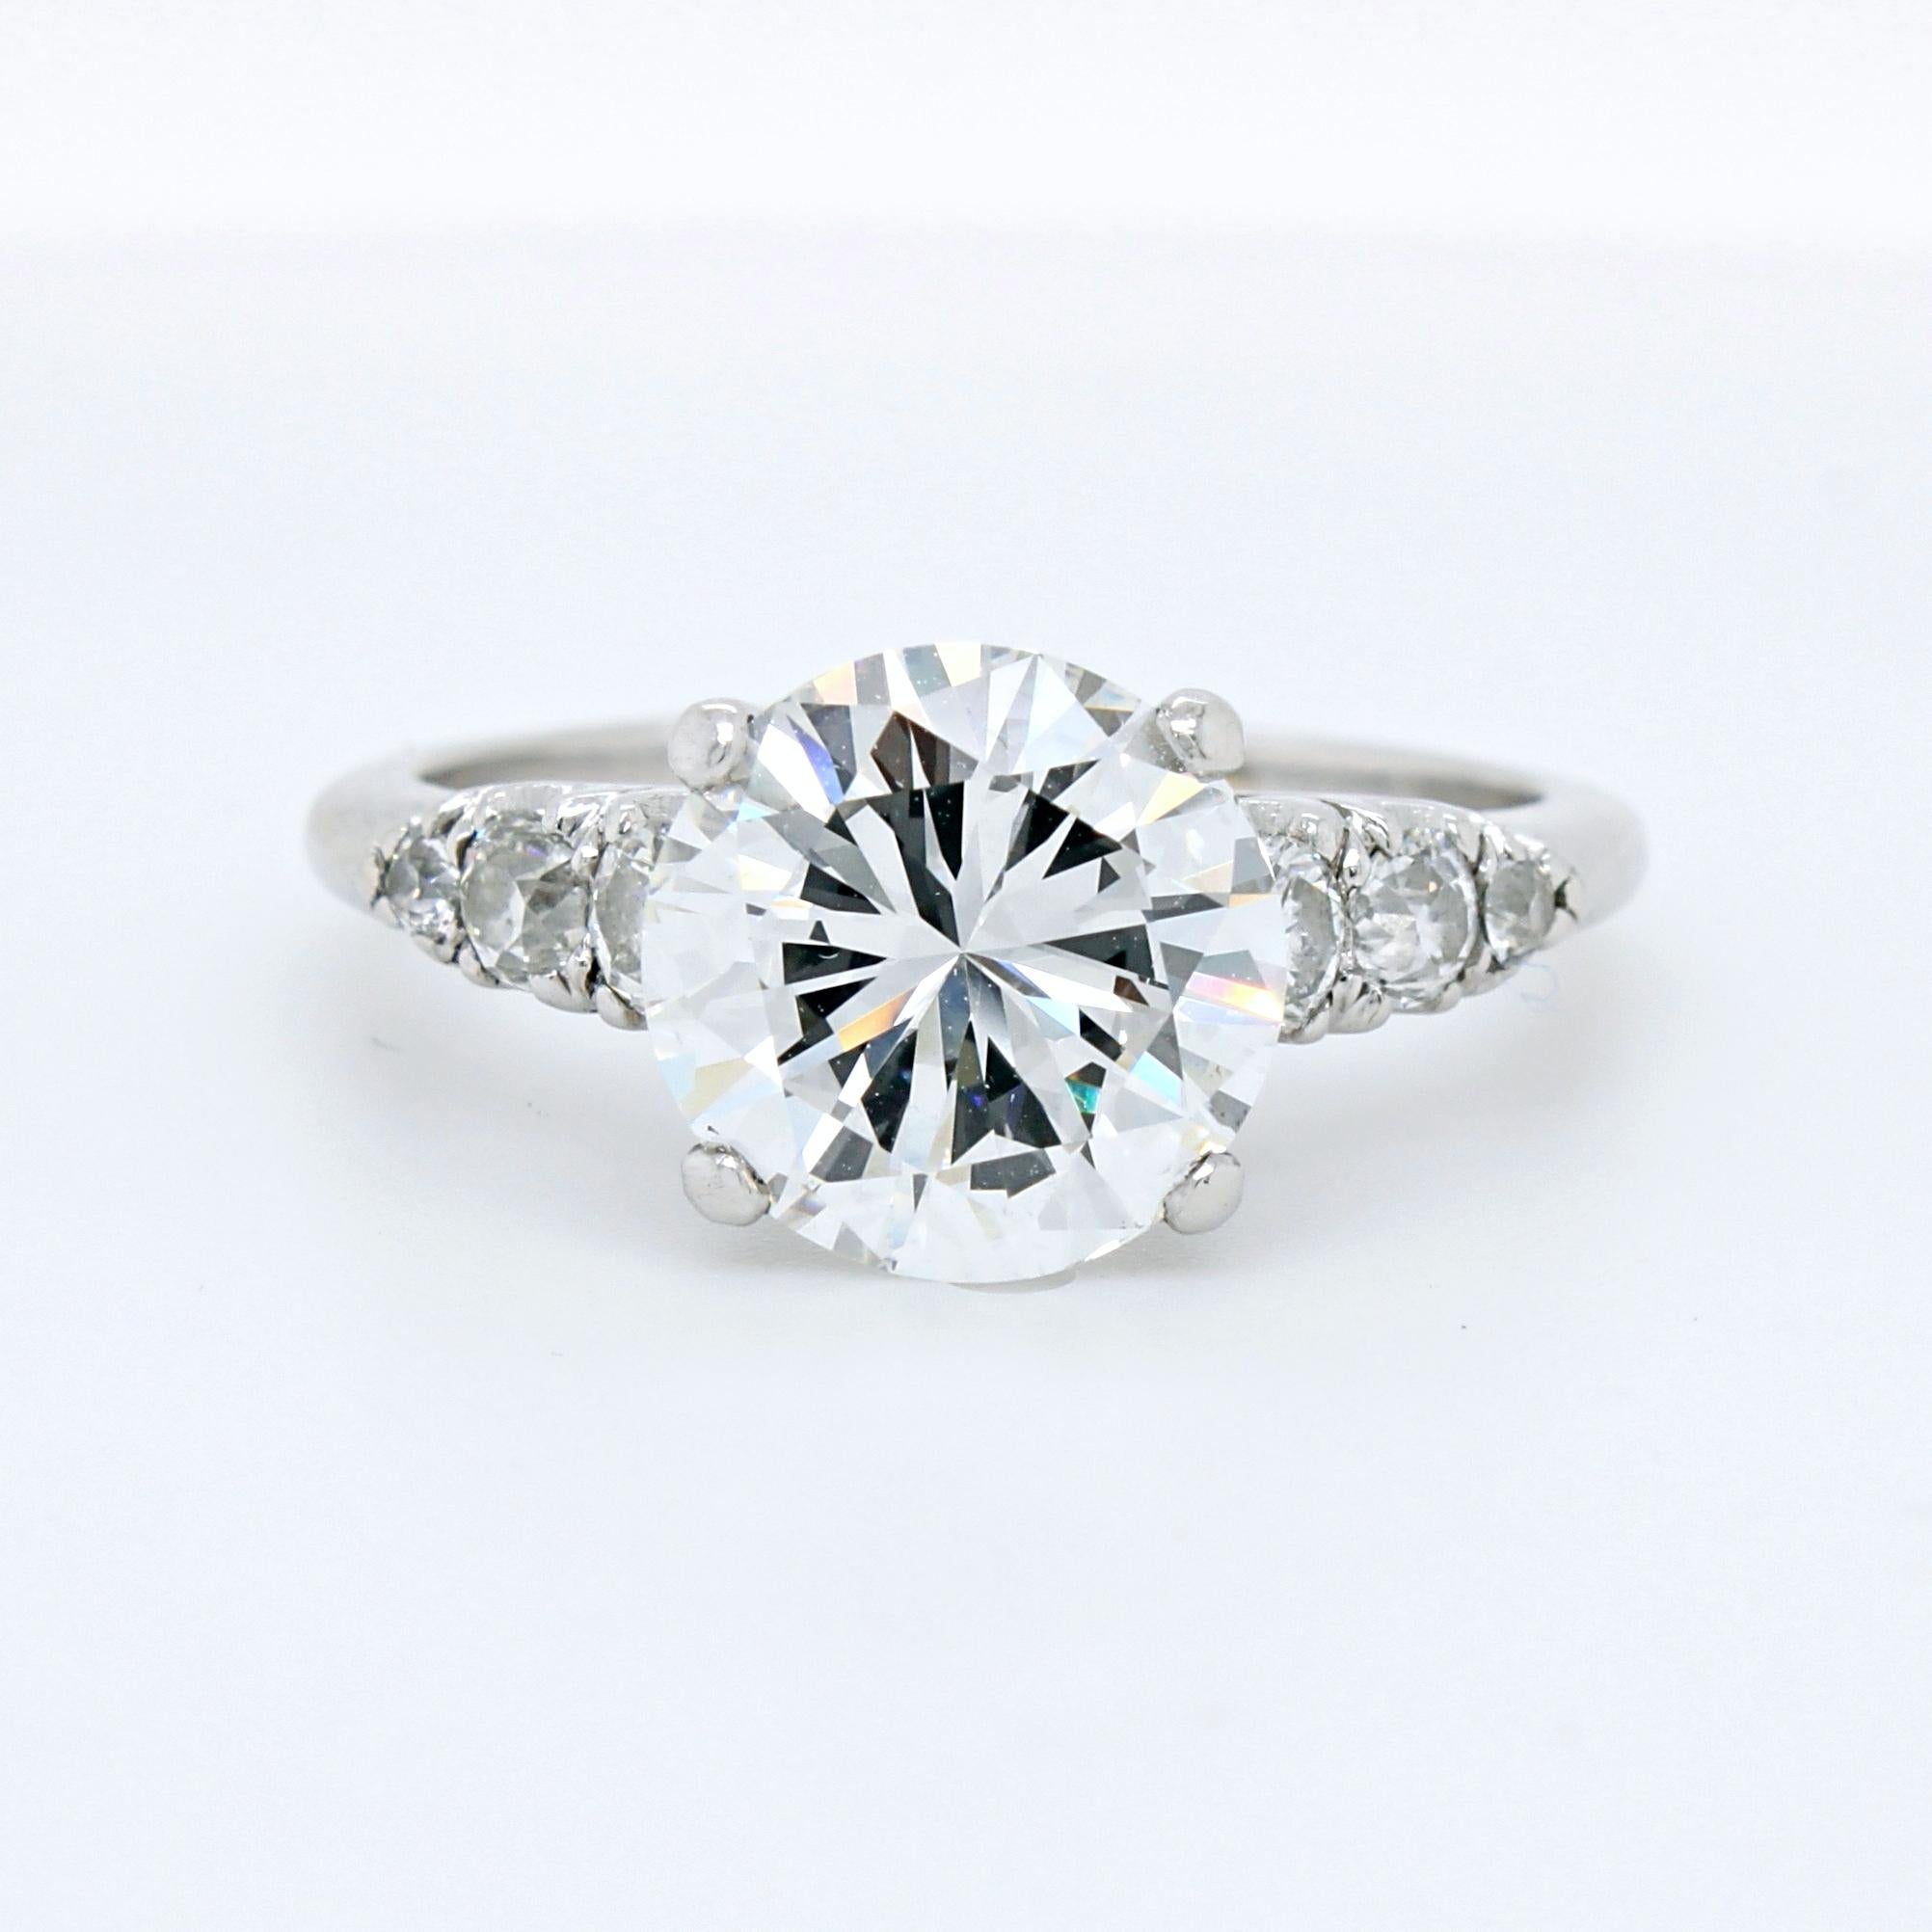 A diamond round brilliant solitaire ring in platinum. The centre diamond weighs 2.72 carats, G colour - VS2 clarity, certified by GIA. It is flanked by three smaller round brilliant cut diamonds on each side.

The design of the ring is very elegant